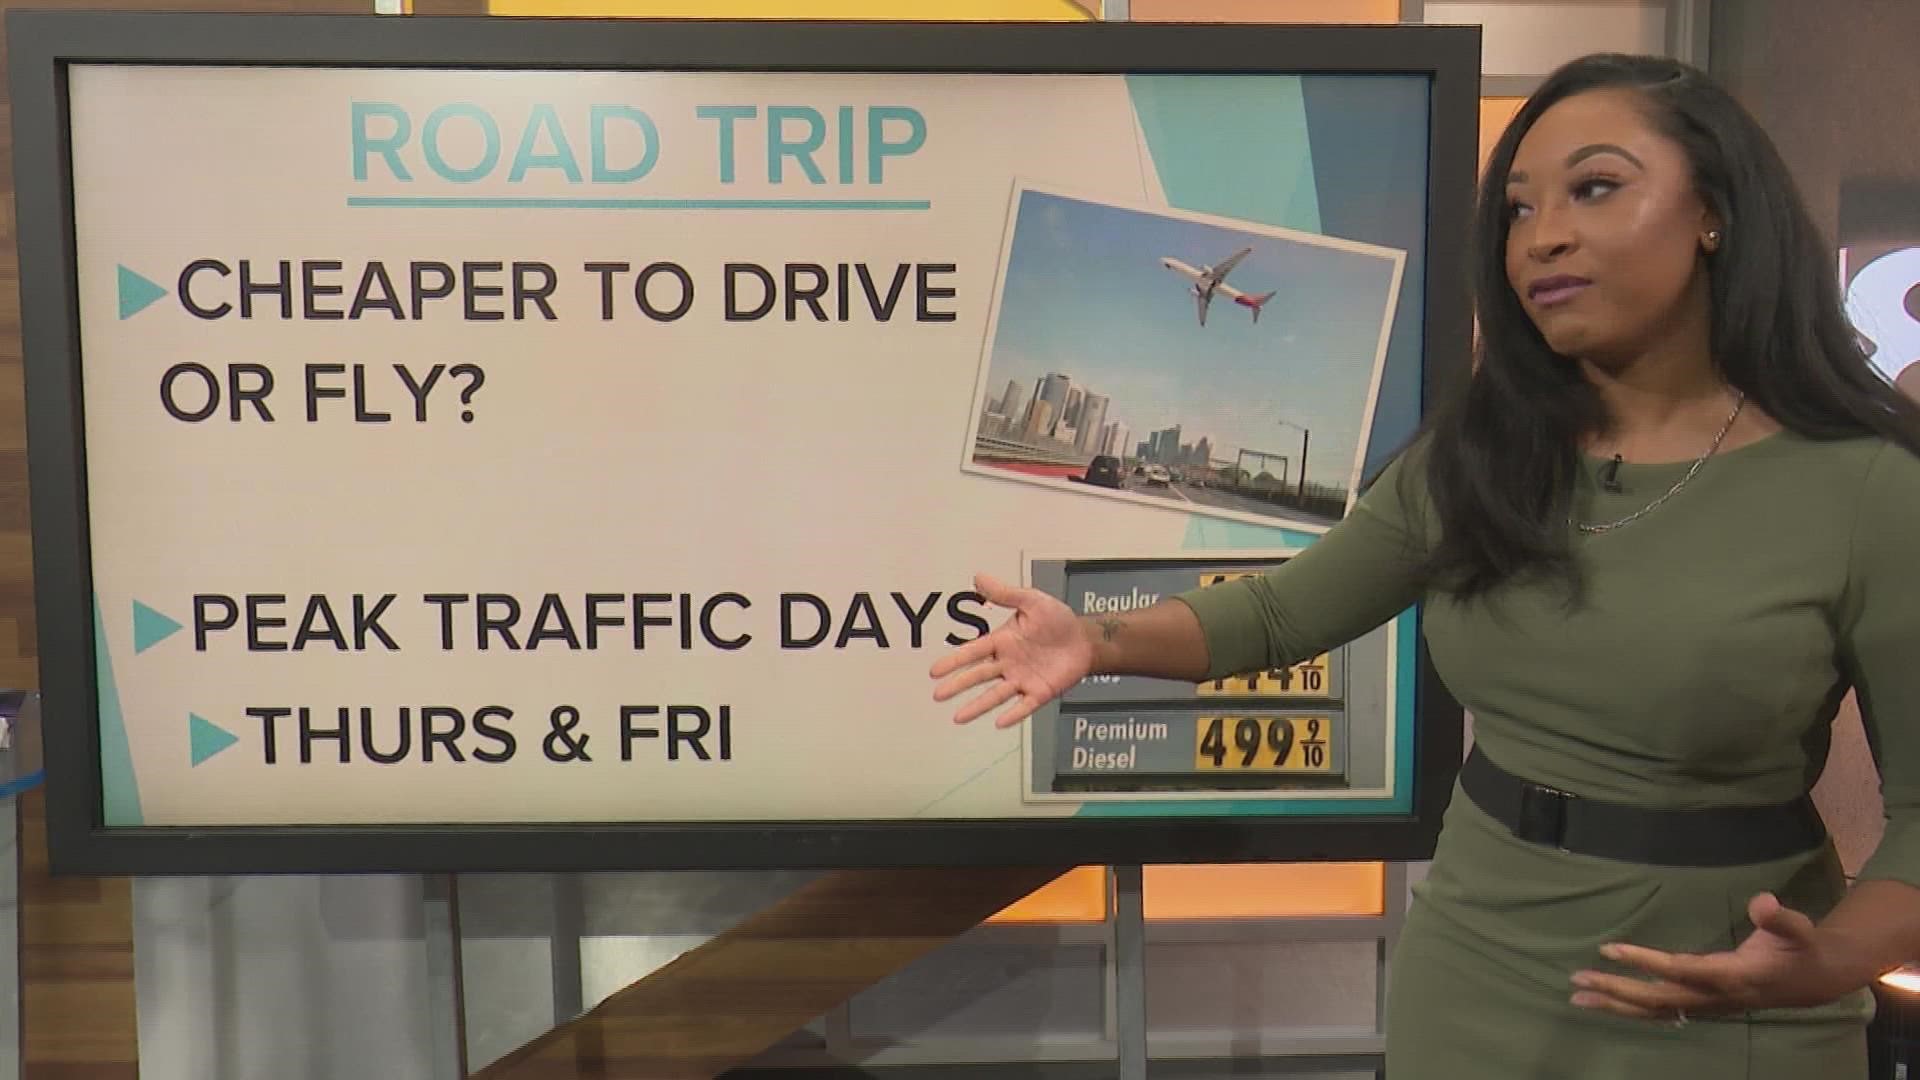 WFAA anchor/reporter Cleo Green has the latest information on prices for flights, car rentals, hotels and more.